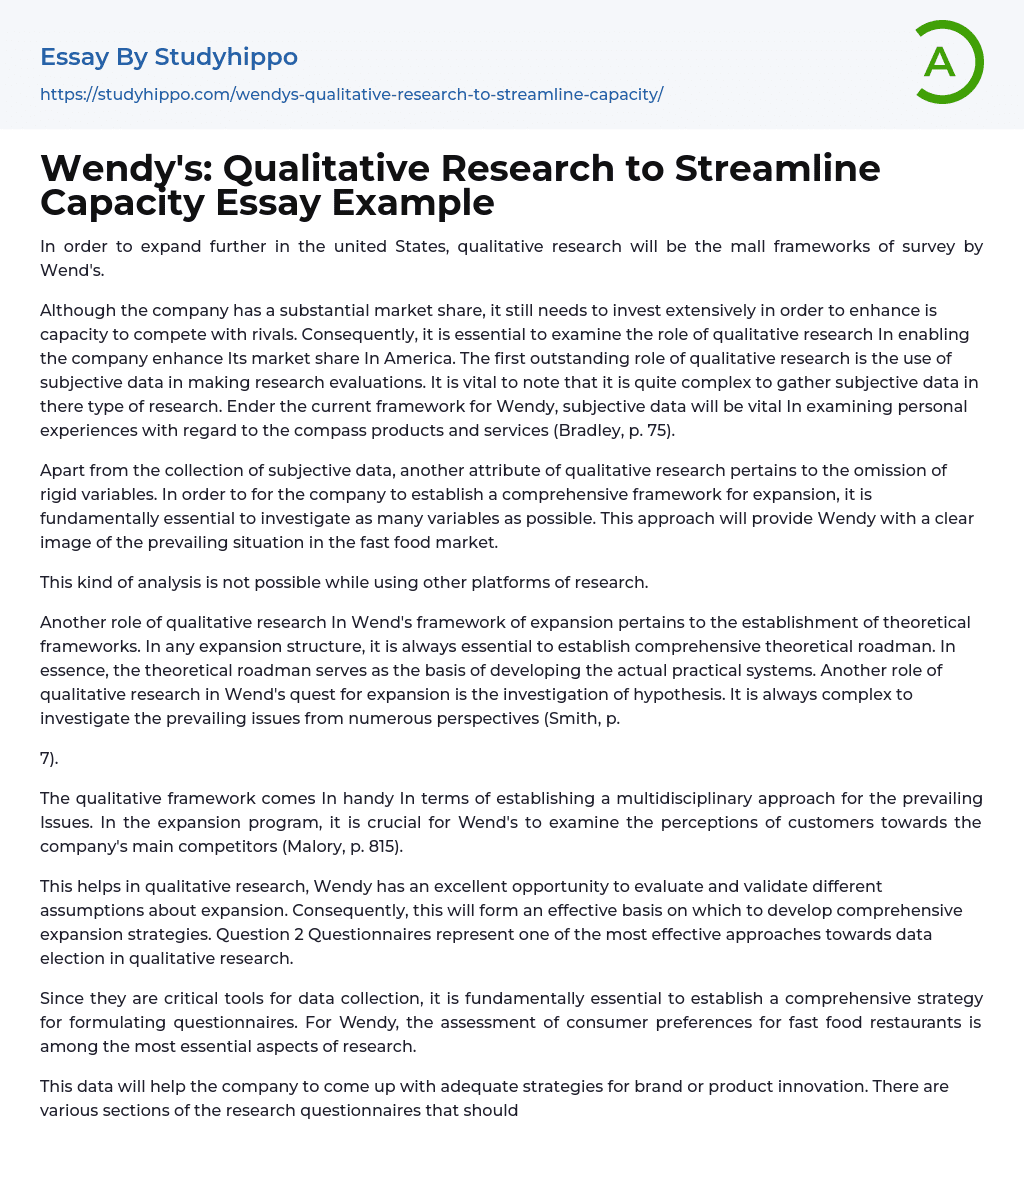 Wendy’s: Qualitative Research to Streamline Capacity Essay Example